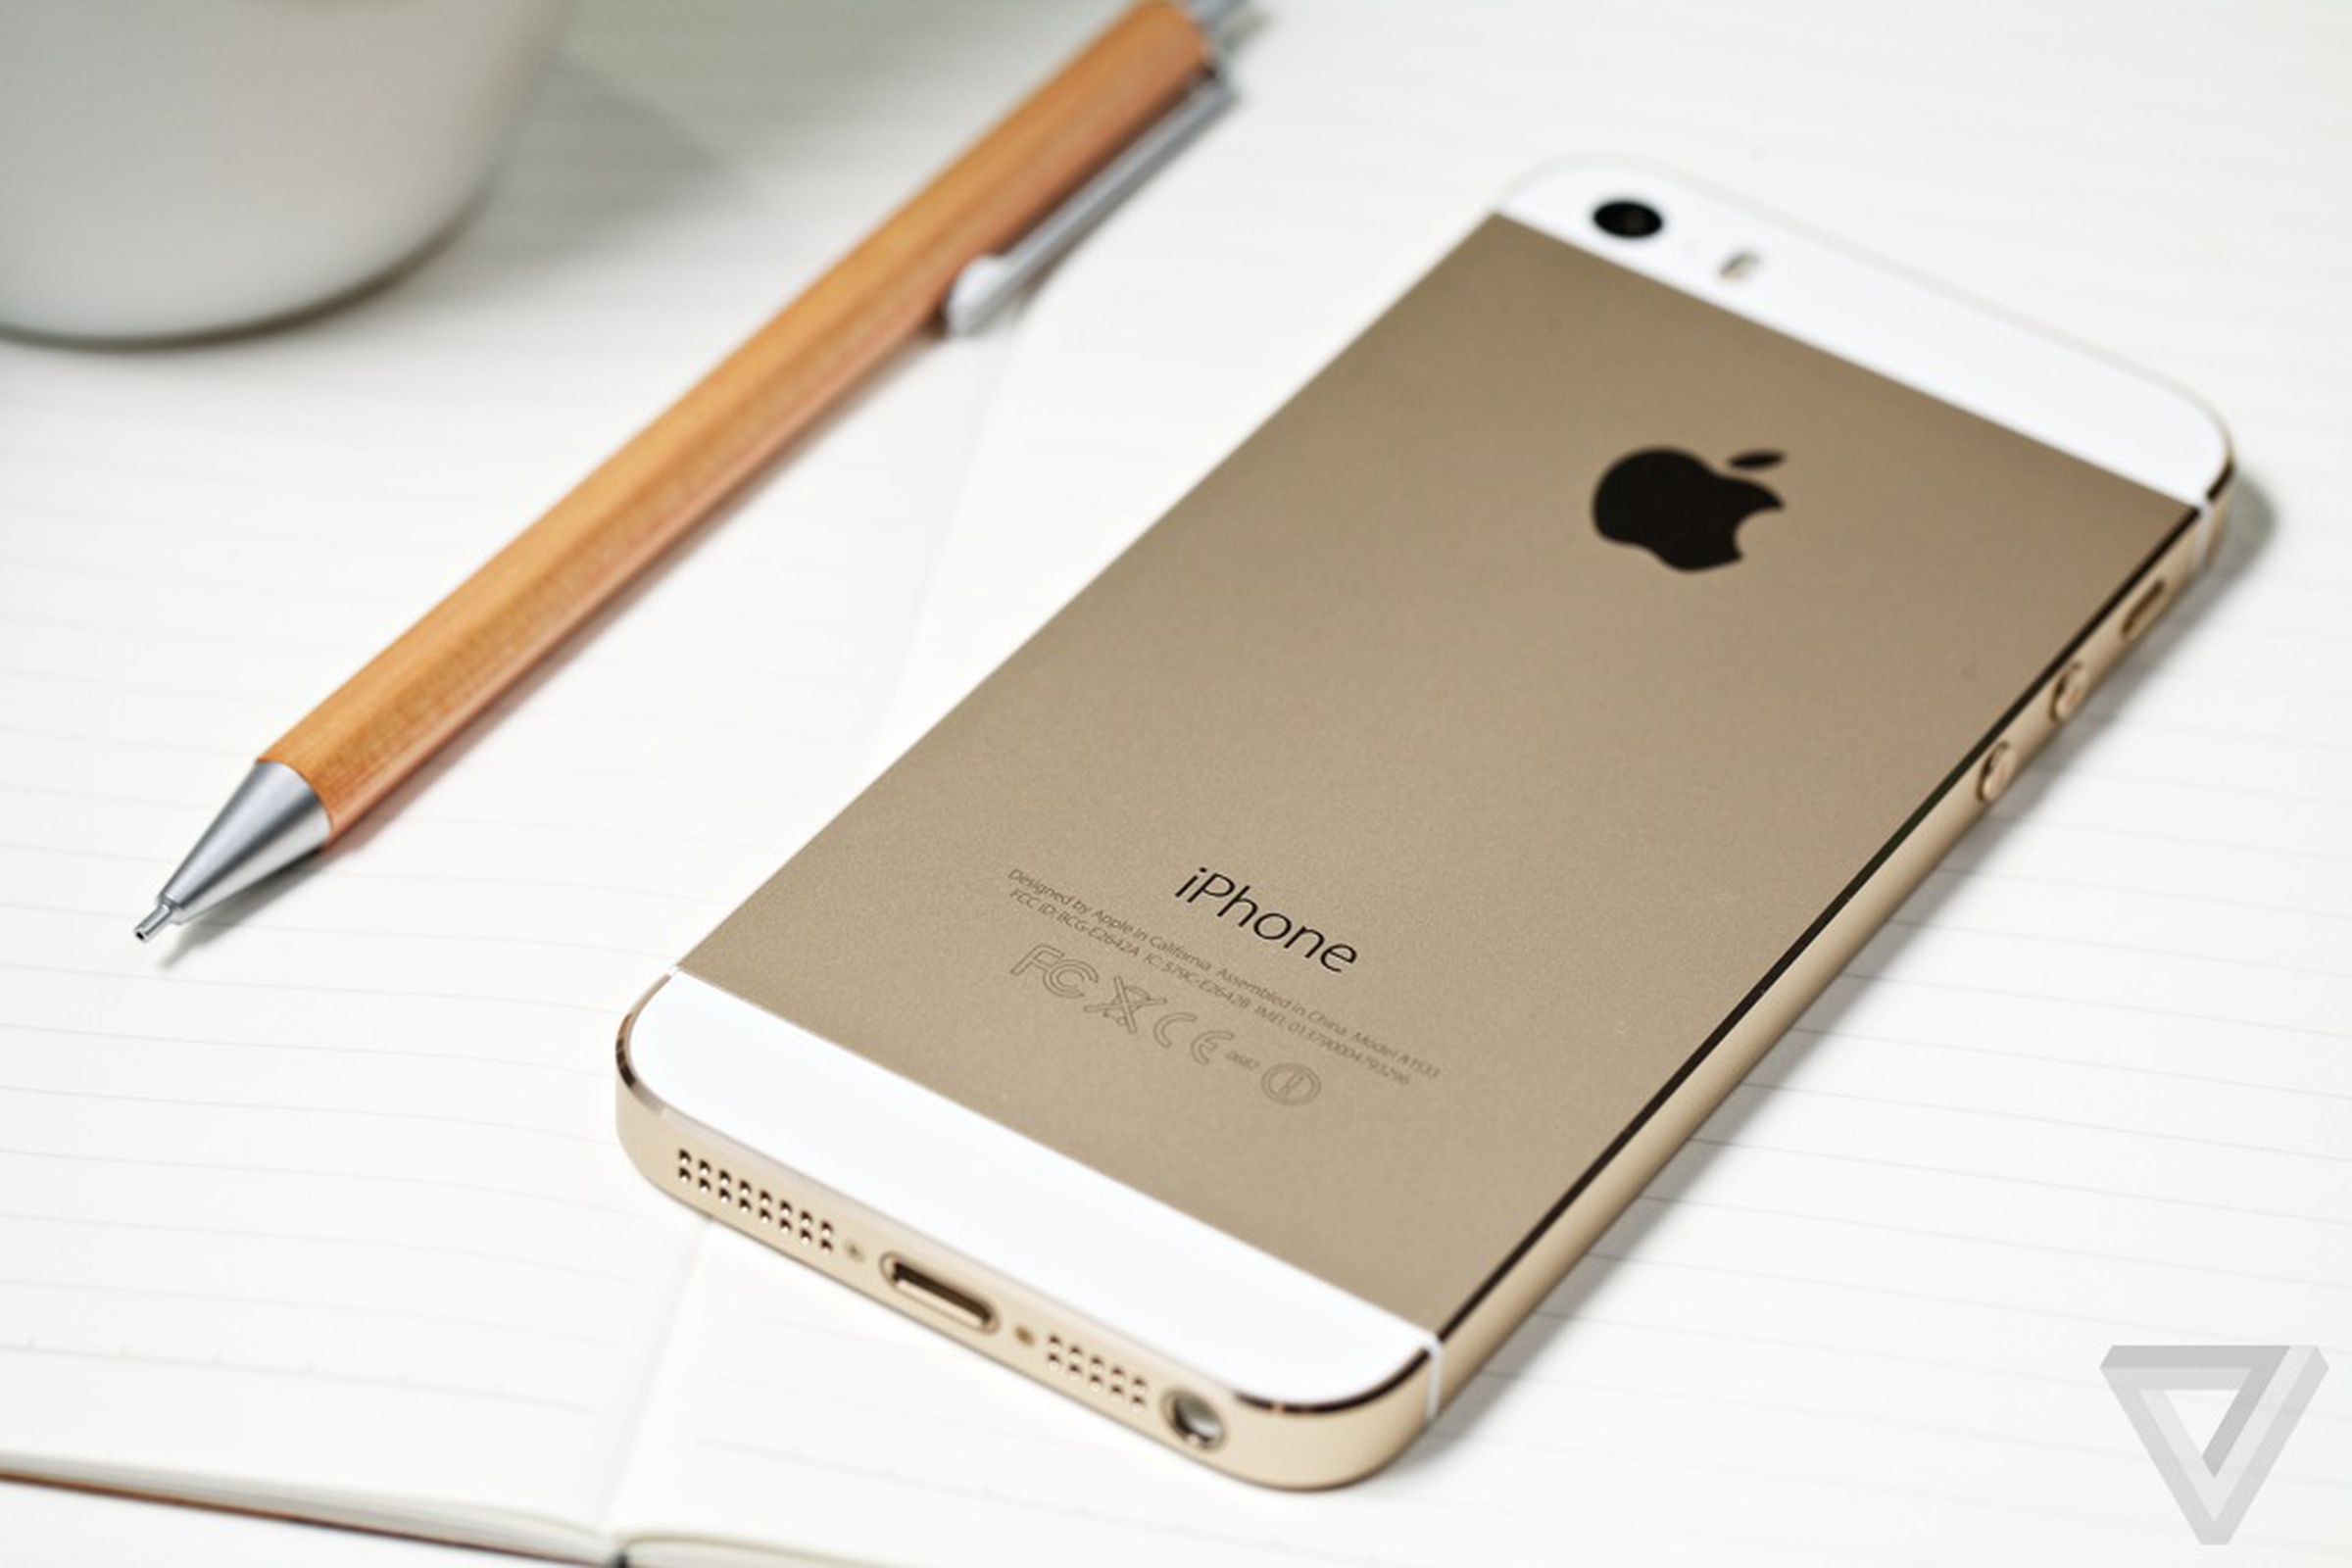 Image of a gold iPhone 5s laying on a table.